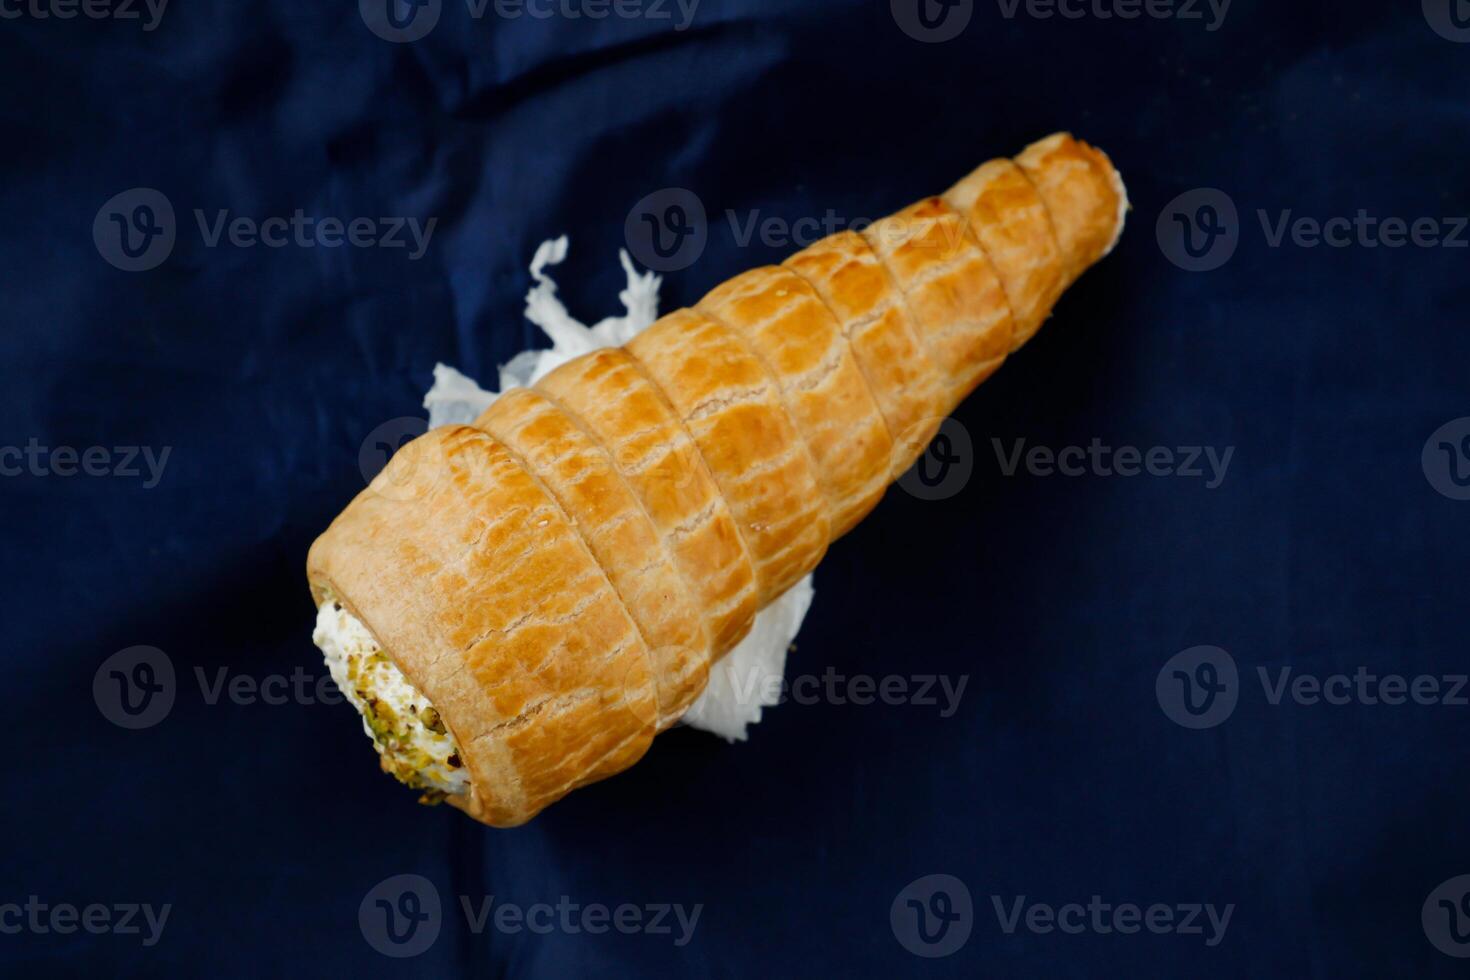 Cream Roll or cream buns isolated on blue napkin top view of french breakfast baked food item photo